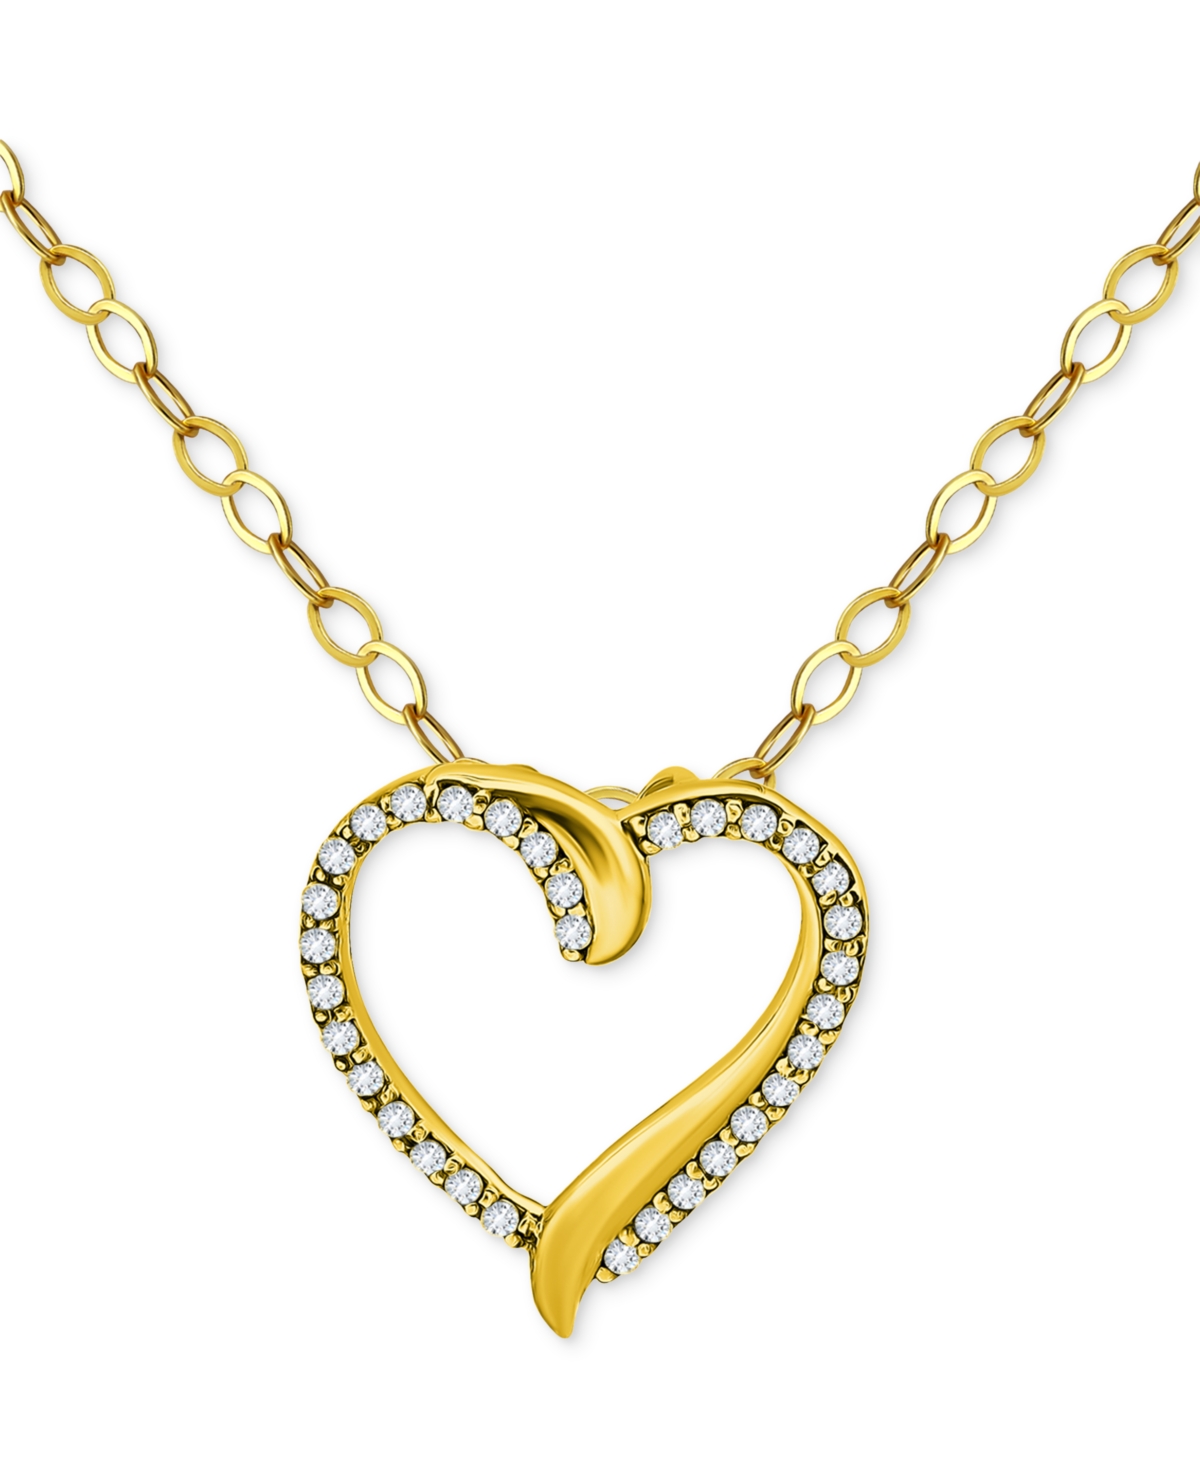 Giani Bernini Cubic Zirconia Open Heart Pendant Necklace In 18k Gold-plated Sterling Silver, 16" + 2" Extender, Cr